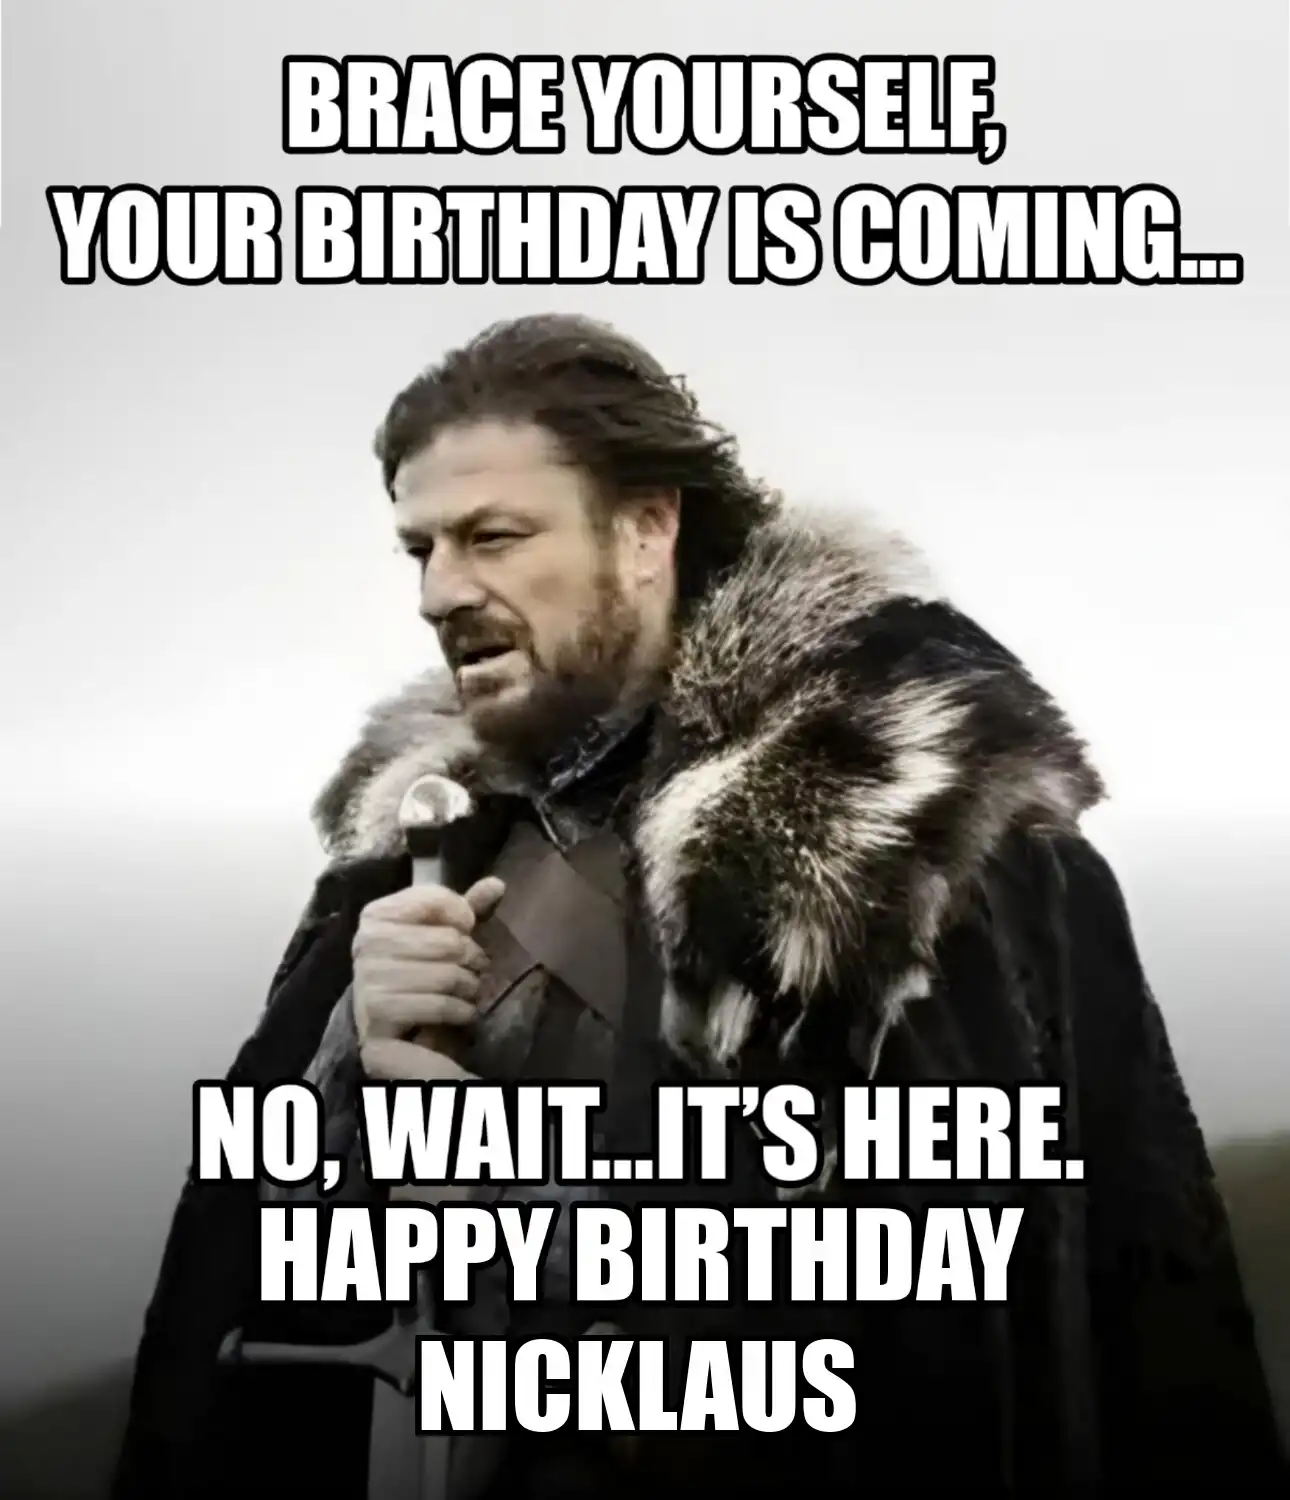 Happy Birthday Nicklaus Brace Yourself Your Birthday Is Coming Meme